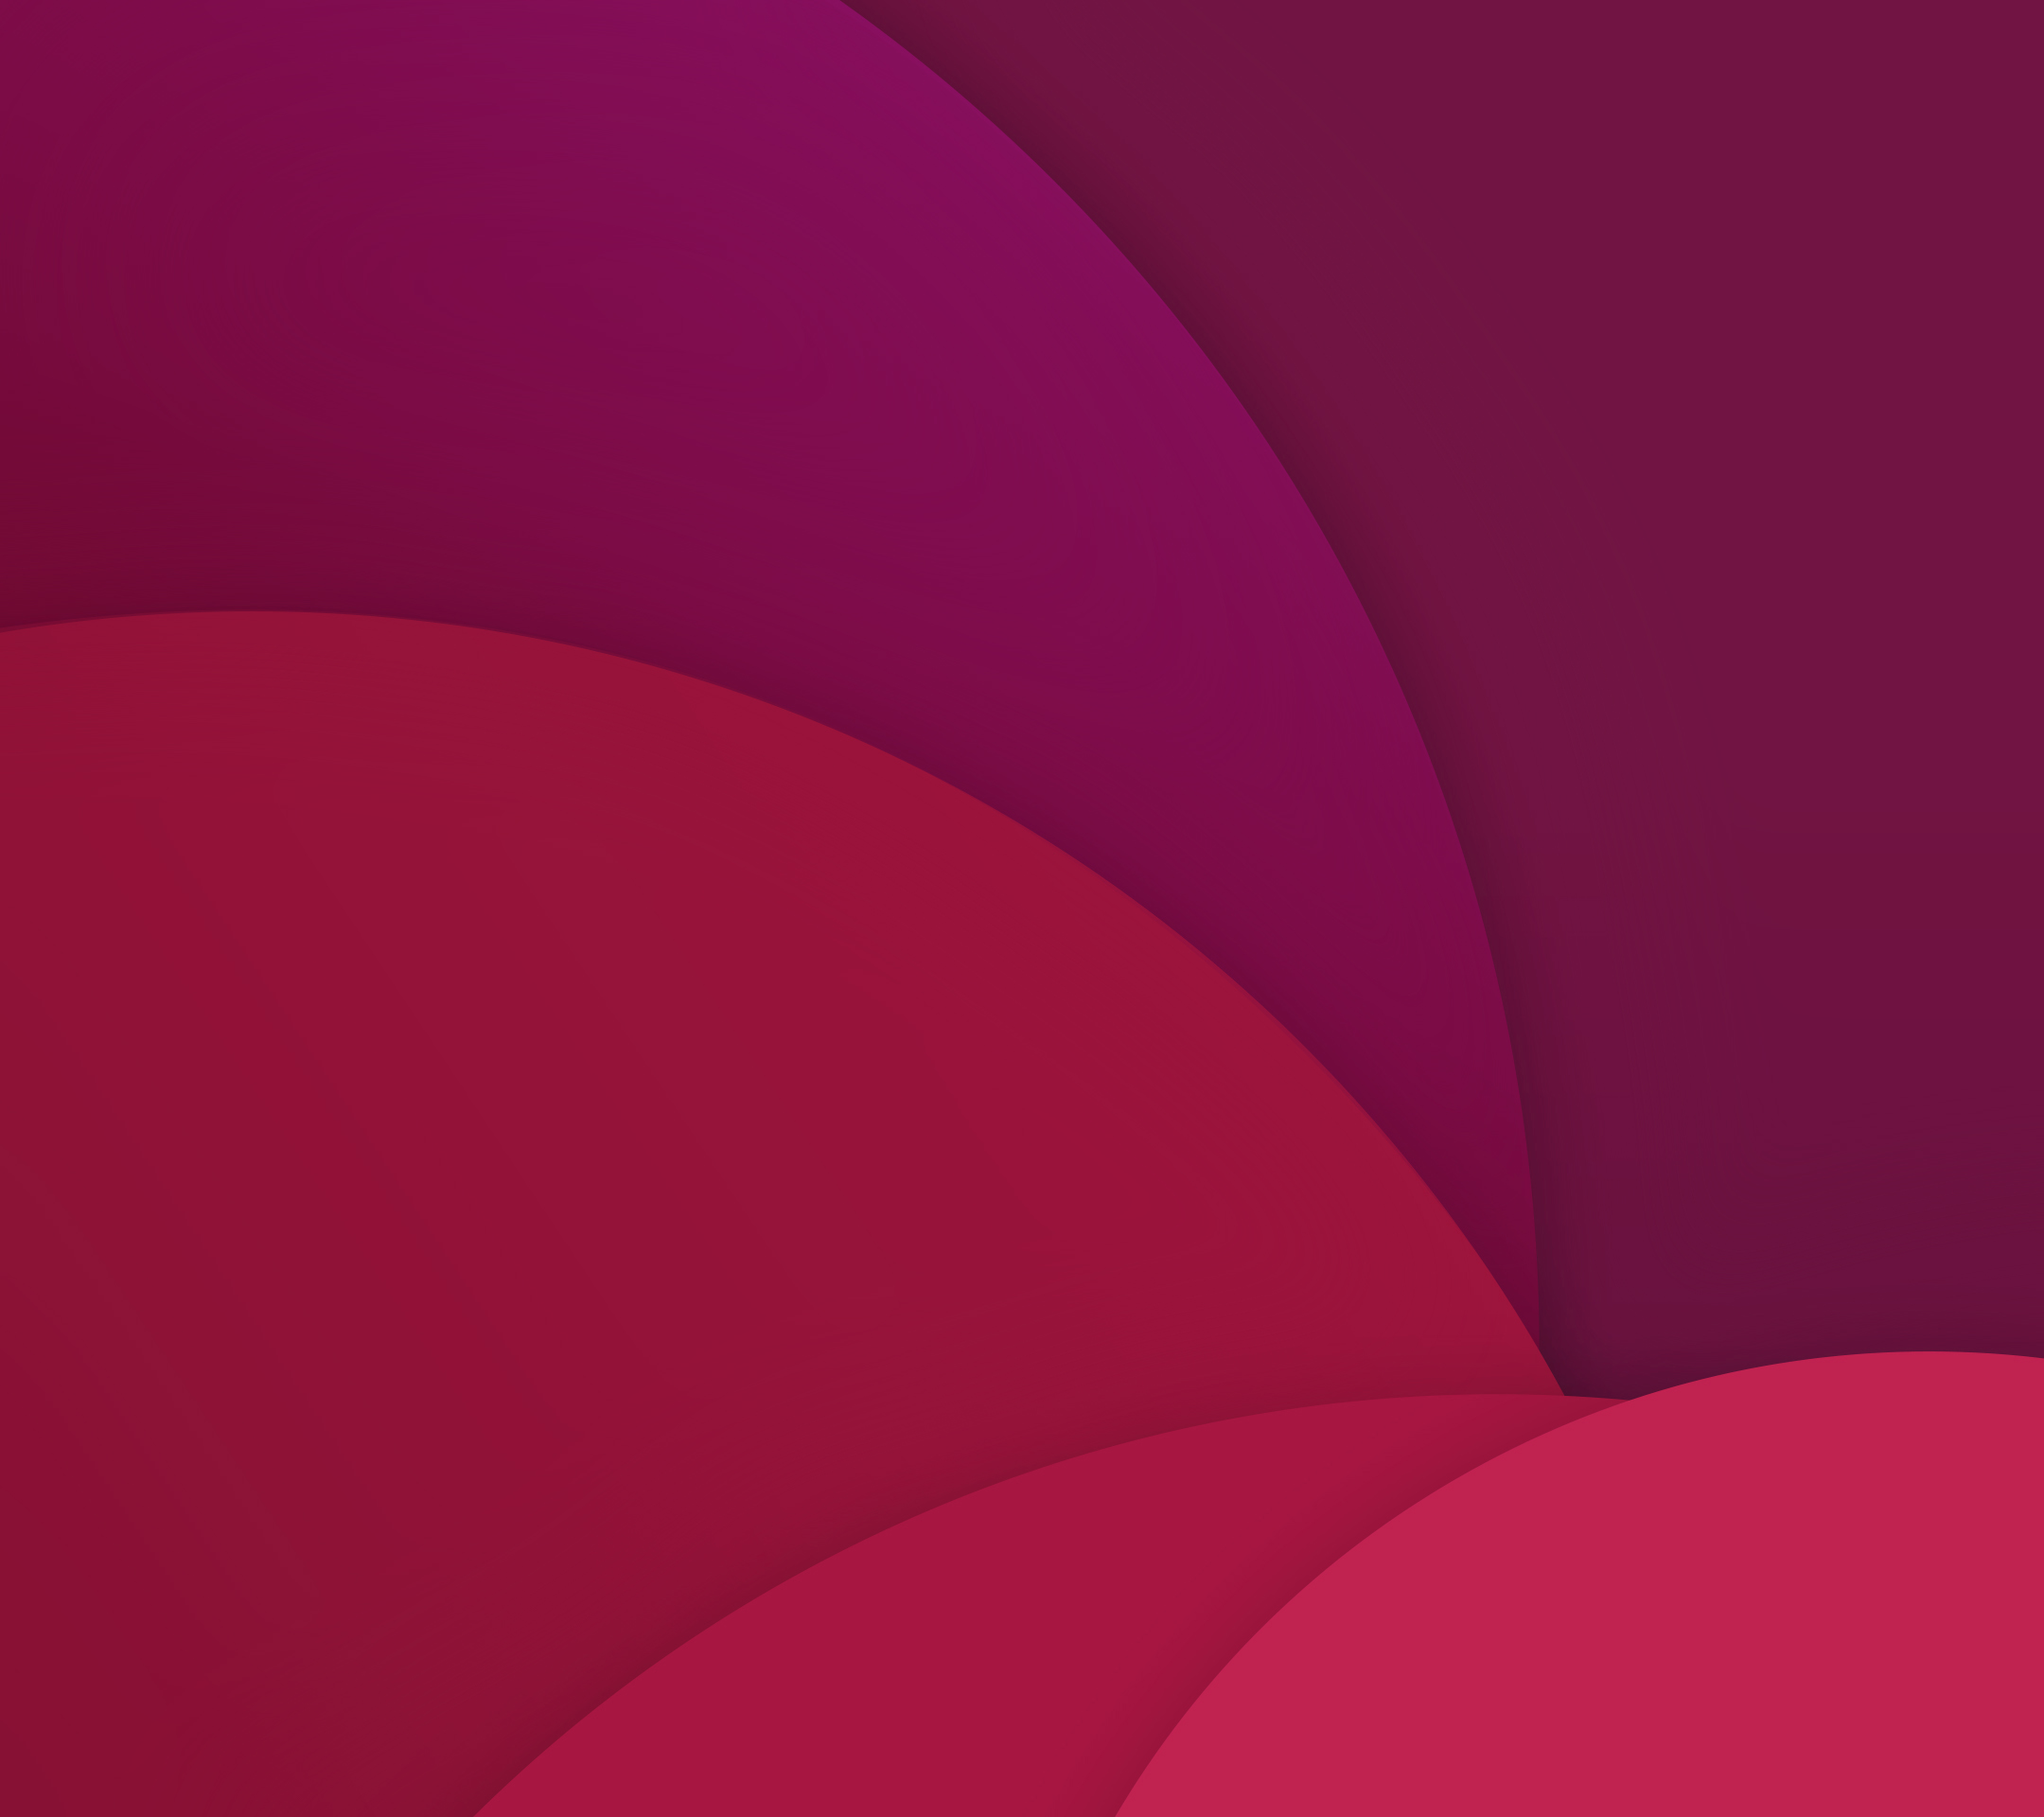 Download all LG G Flex 2 high res wallpapers here